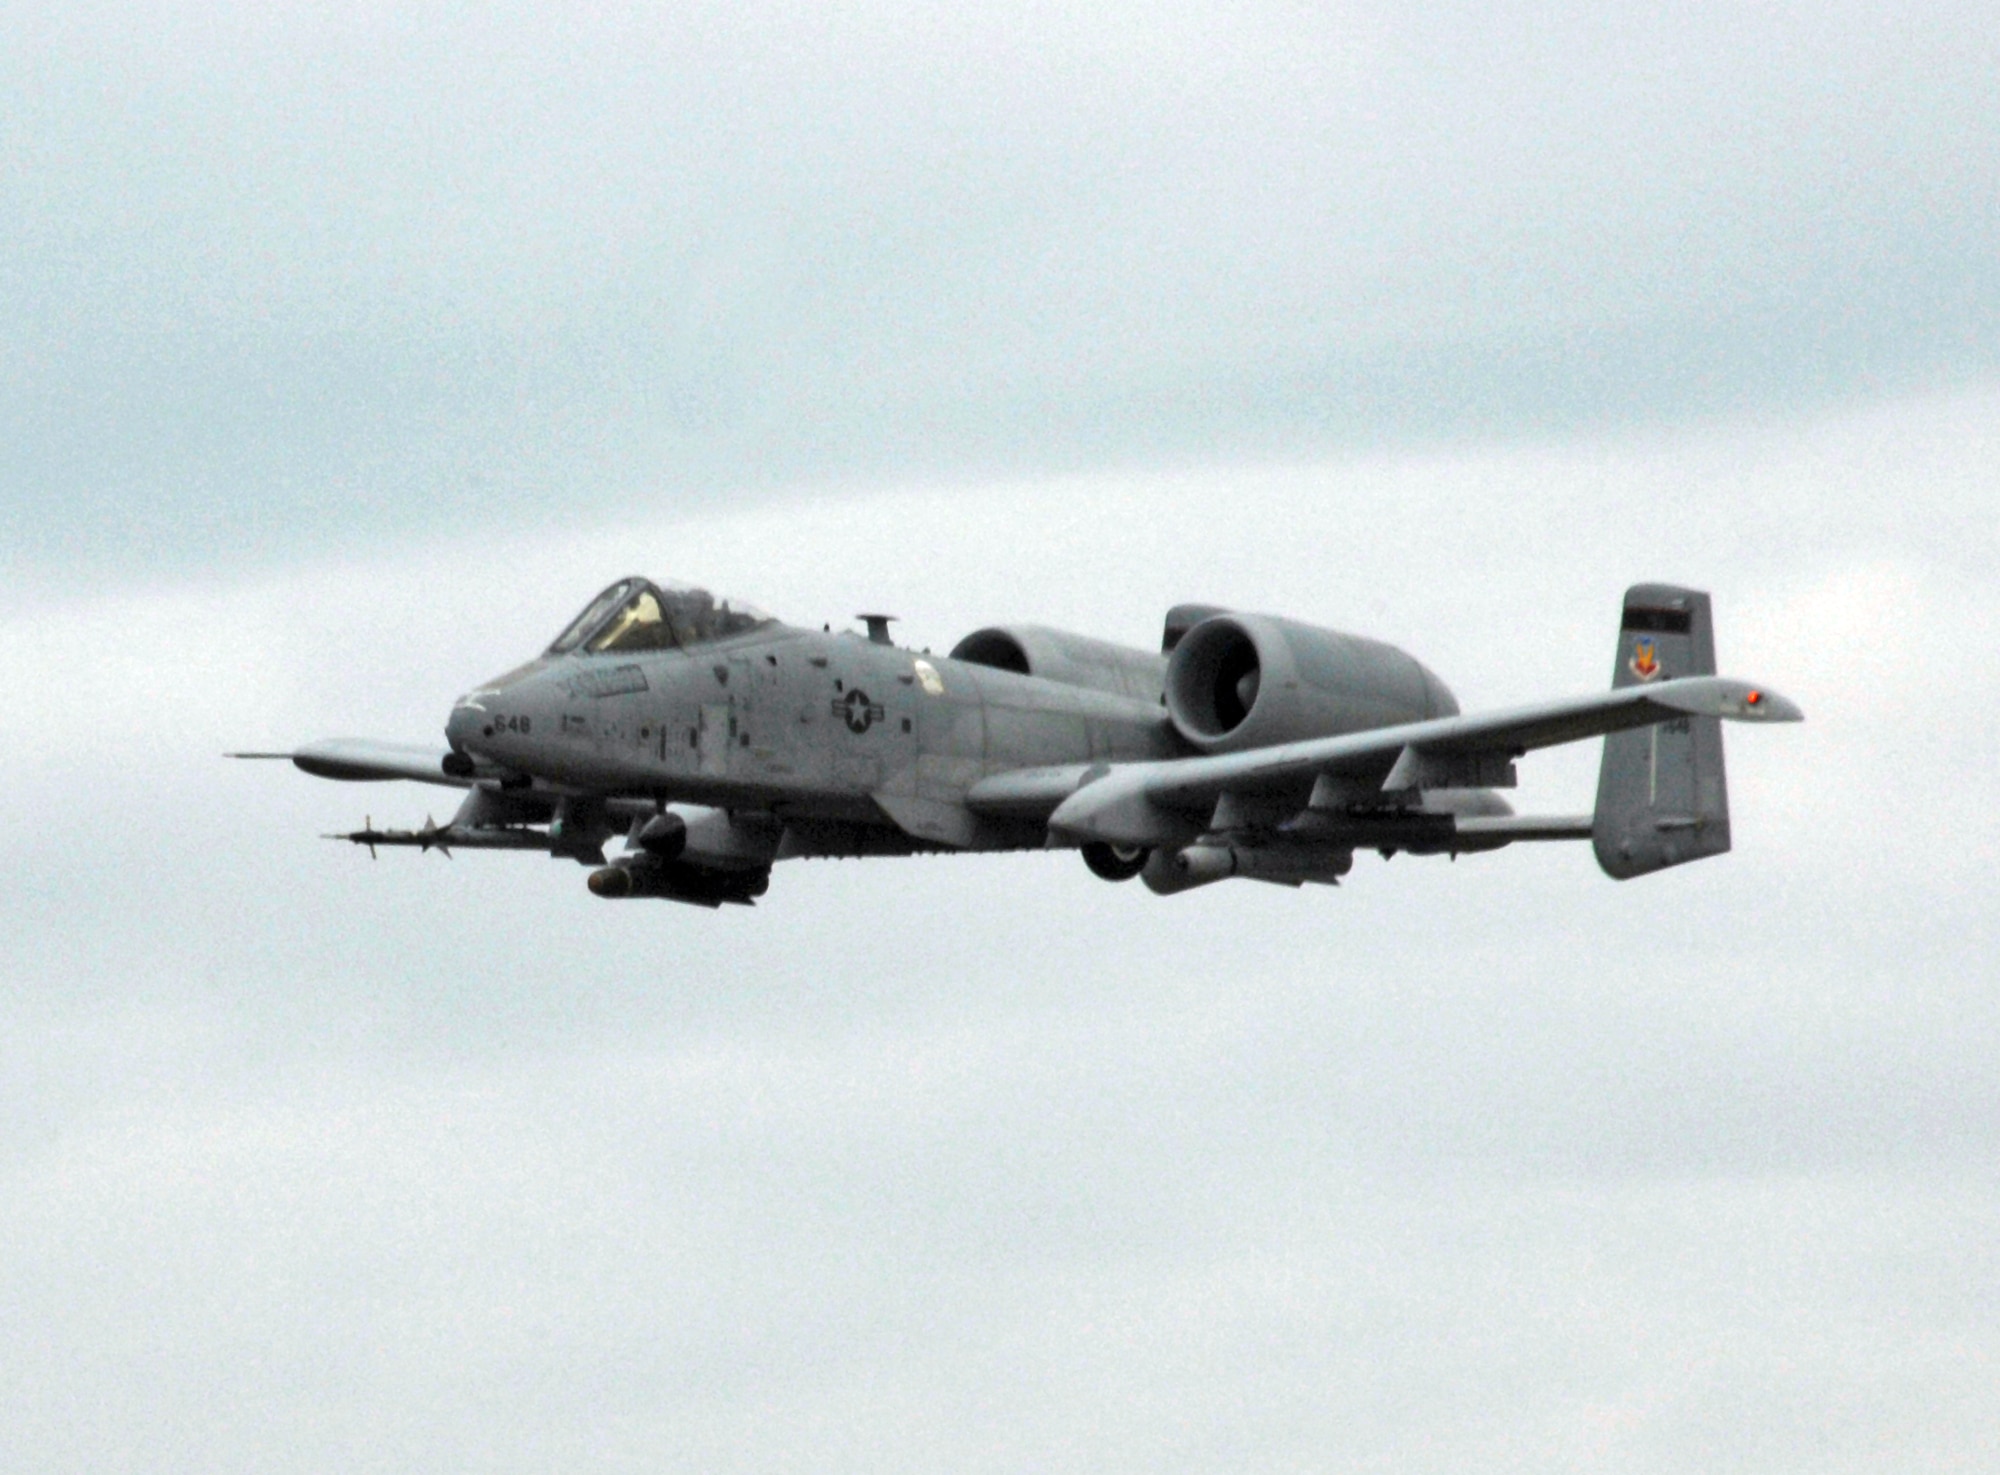 According to Air Force officials, human error was the cause of an A-10C Thunderbolt II accident that took place May 10, 2010, at Moody Air Force Base, Ga. The aircraft was assigned to the 75th Fighter Squadron at Moody AFB. (U.S. Air Force photo/Staff Sgt. Jake Richmond)